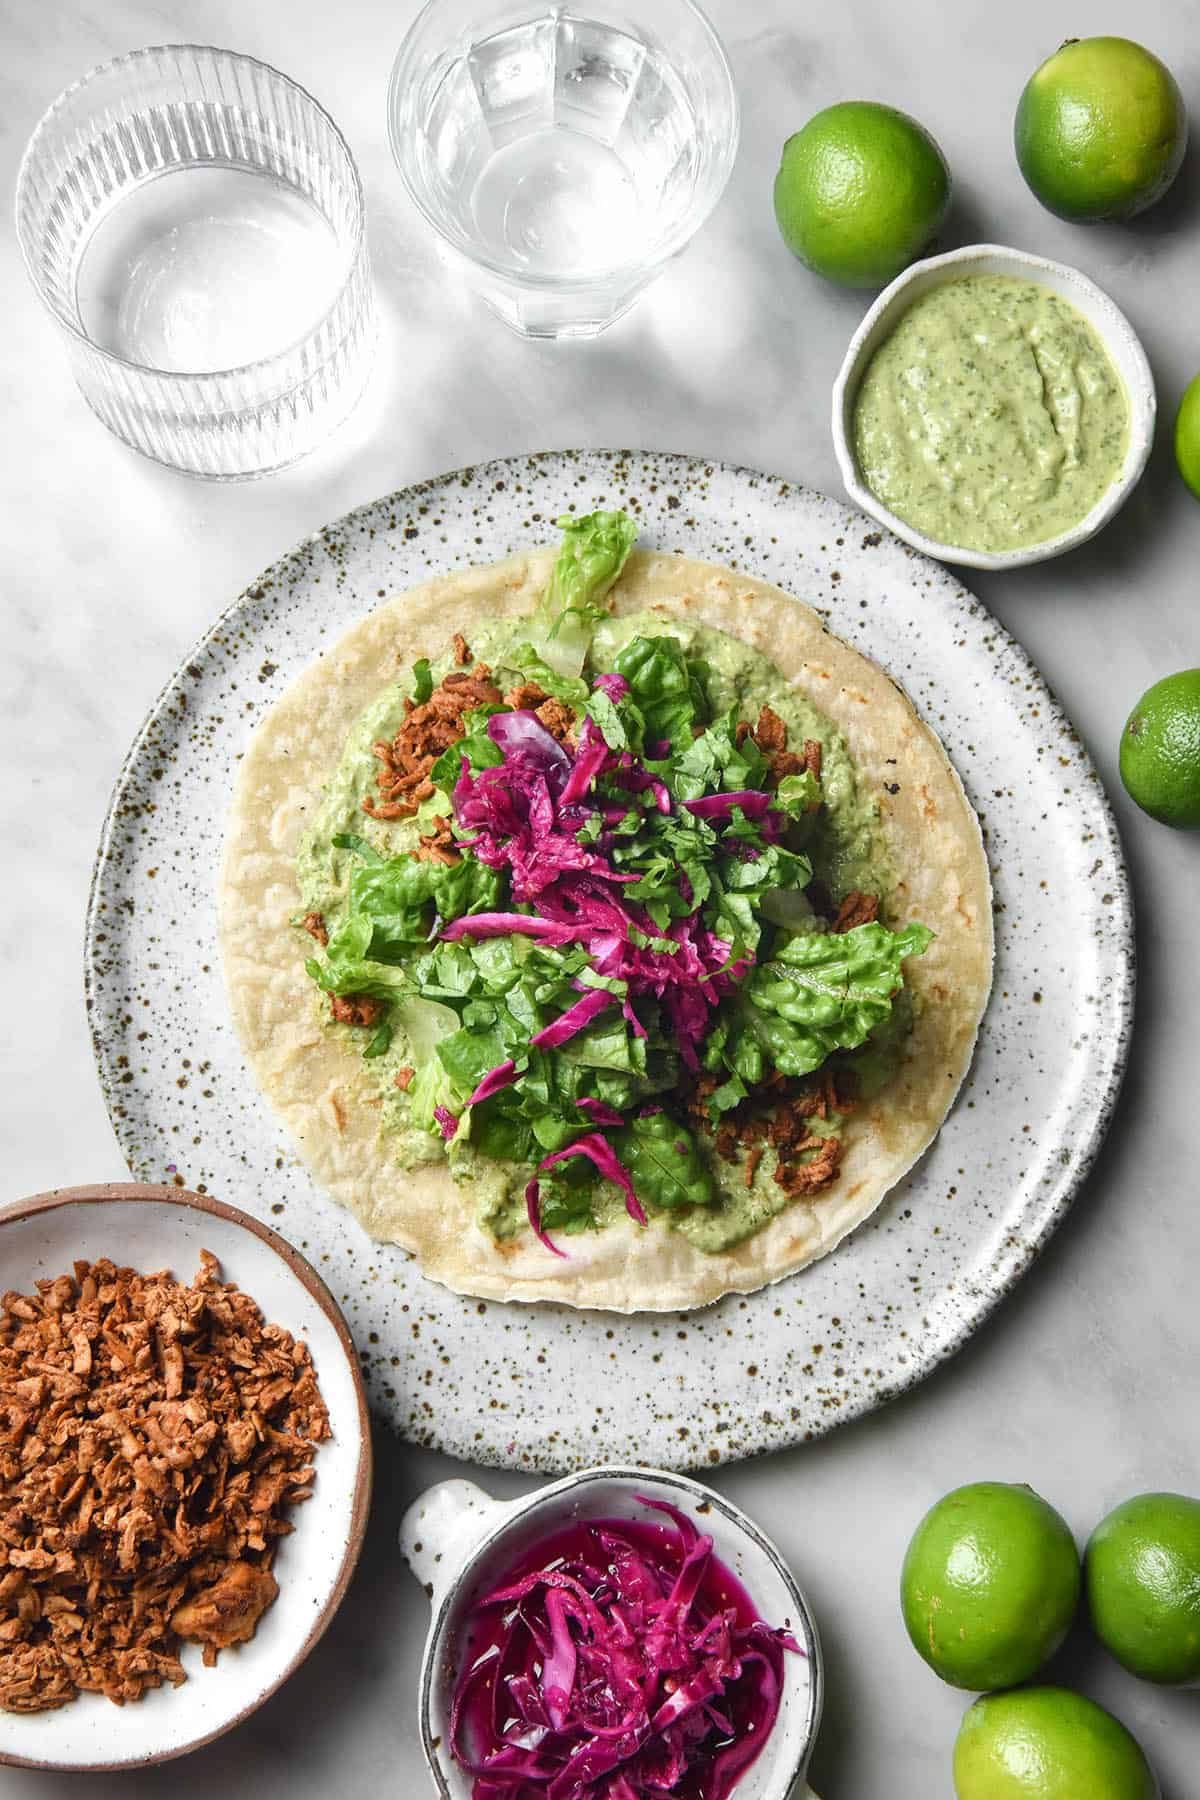 An aerial image of a gluten free tortilla topped with tofu mince, lettuce and pickled red cabbage. The tortilla sits atop a white speckled ceramic plate atop a white marble table. The plate is surrounded by bowls of the ingredients, extra limes and glasses of water.